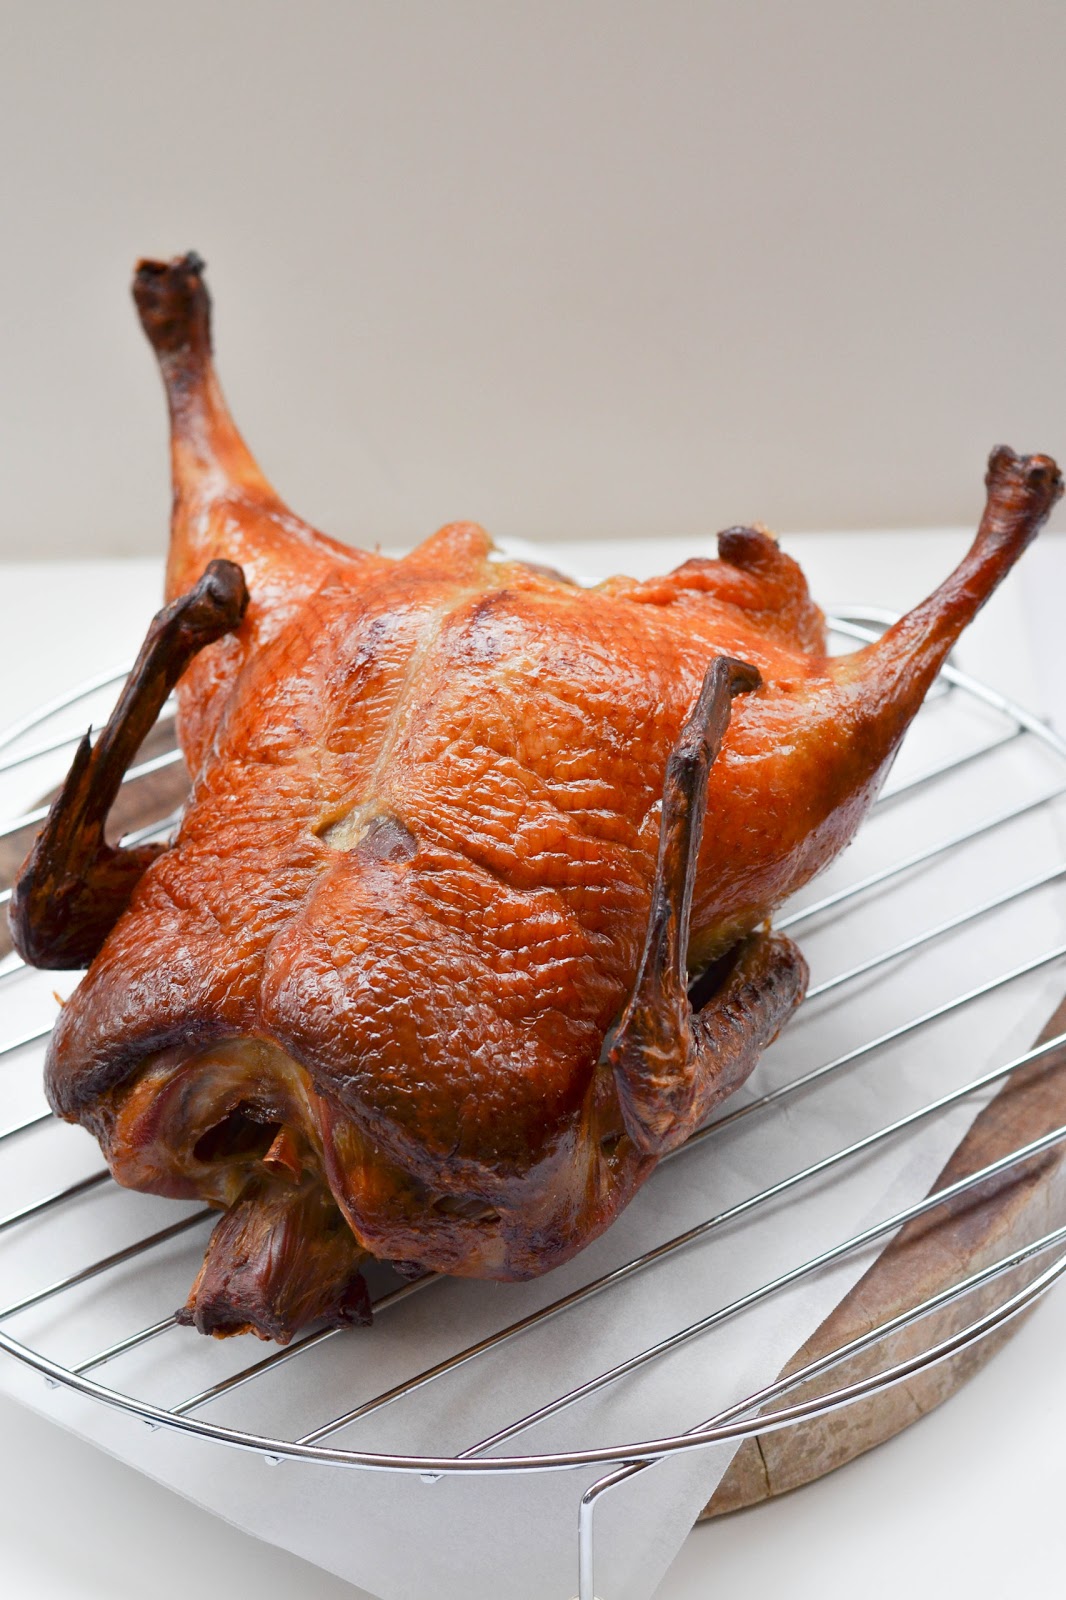 Yearly Traditions with Roasted Peking Duck. | The moonblush Baker